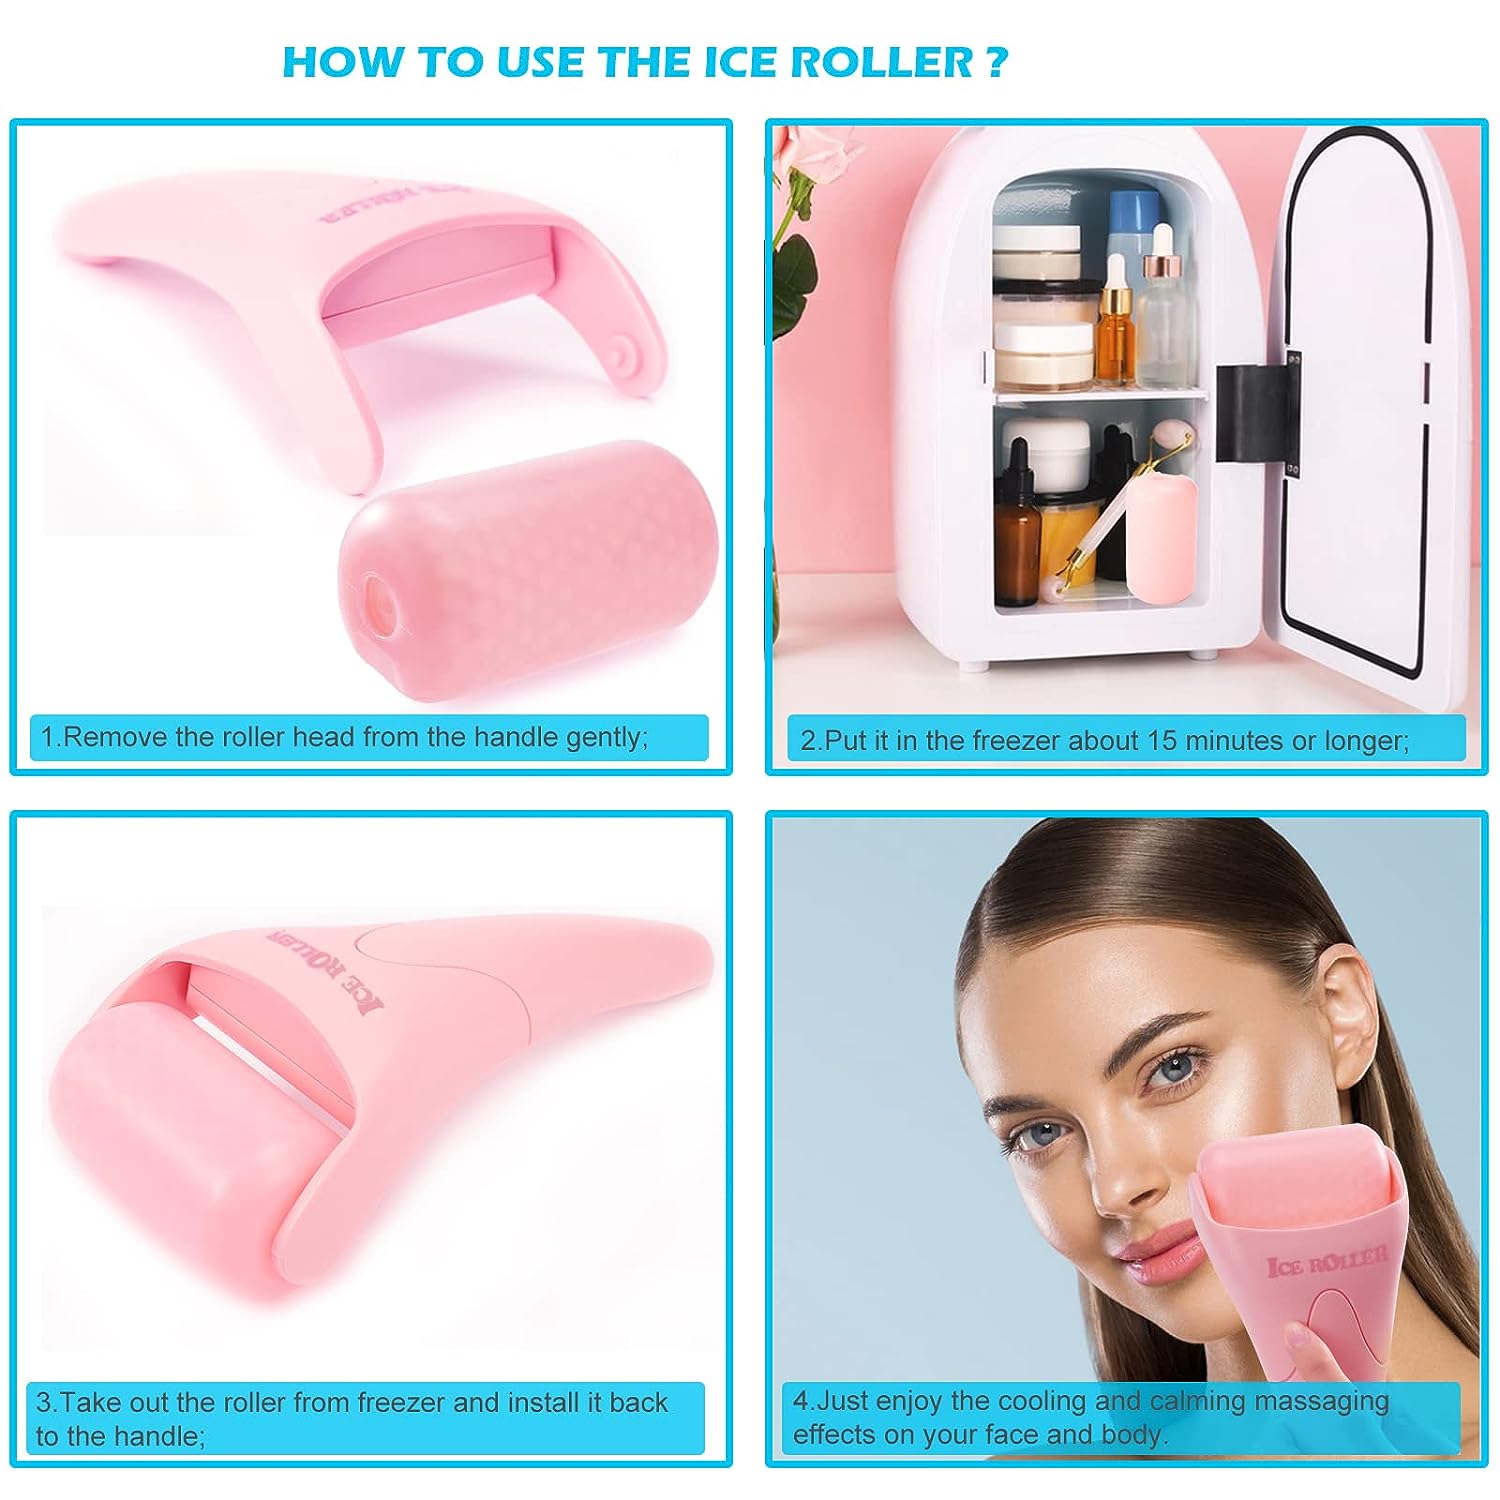 Wholesale prices with free shipping all over United States 2 PACK Ice Roller for Face and Body Massage, Facial Roller Skin Care Tool for Reduce Wrinkles and Puffiness, Migraine Pain Relief and Skin Tighten, Cold Therapy for Cooling and Calming.(Pink+Green) - Steven Deals